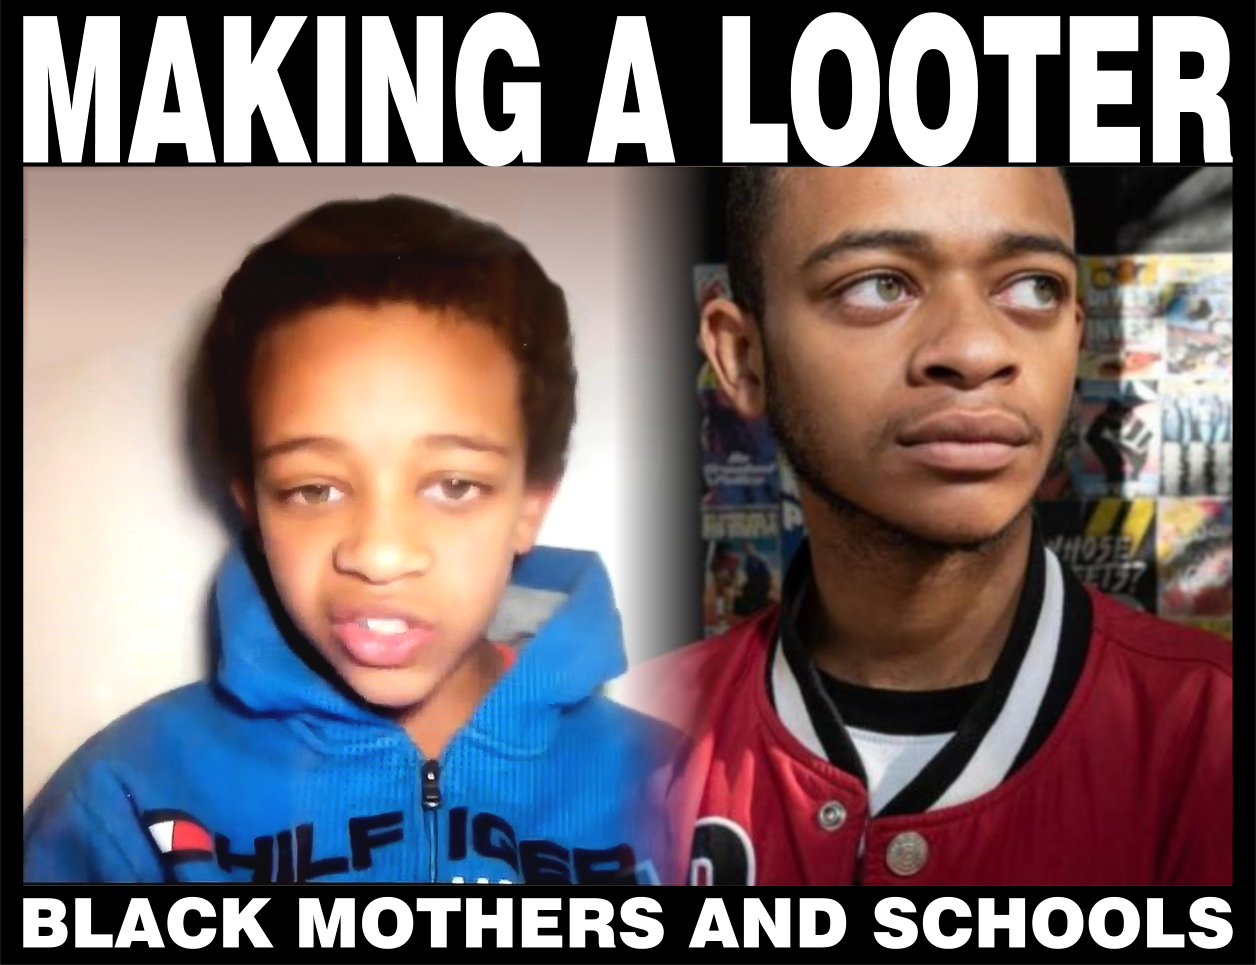 Making a looter - black mothers and schools